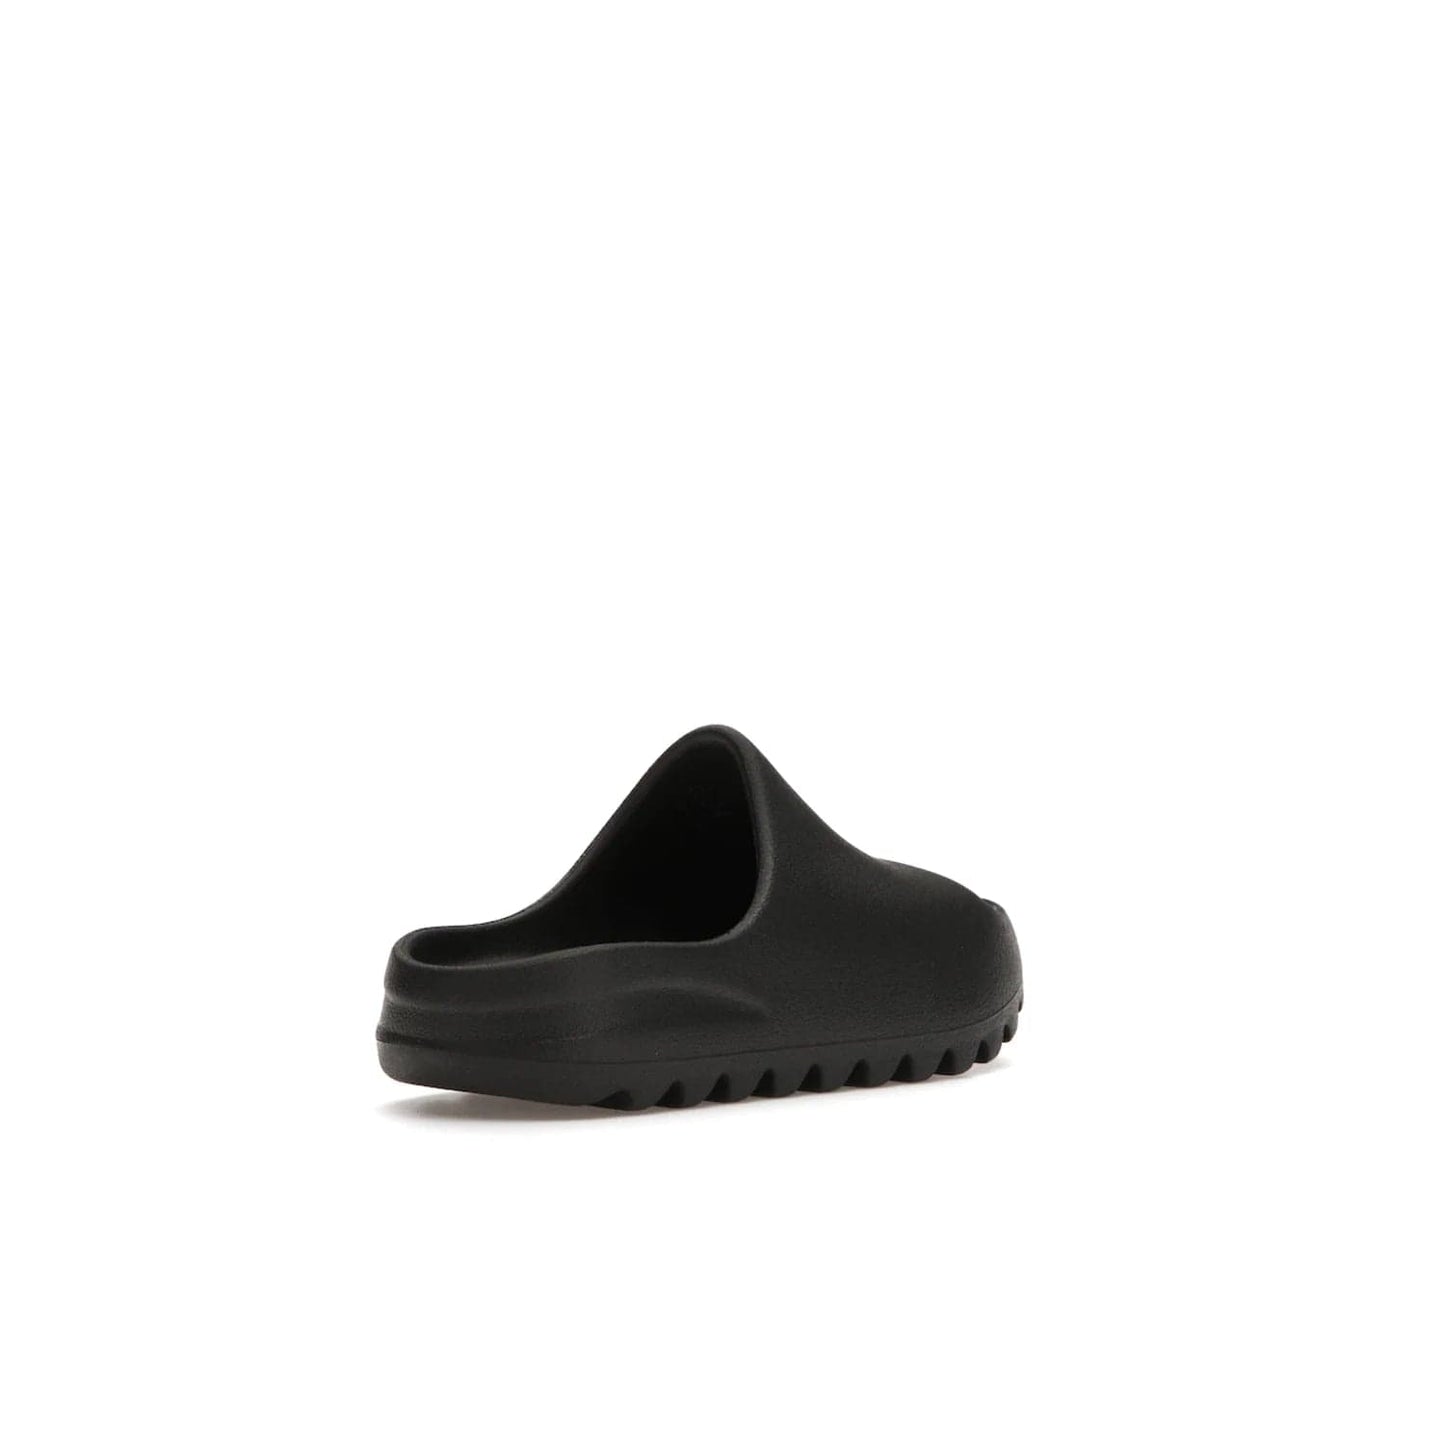 adidas Yeezy Slide Onyx (Kids) - Image 32 - Only at www.BallersClubKickz.com - adidas Yeezy Slide Onyx (Kids): Comfortable foam construction with textured surface and iconic three-stripe logo. Breathable, open-toe design and deep grooves for traction. Released in March 2021 at $50.